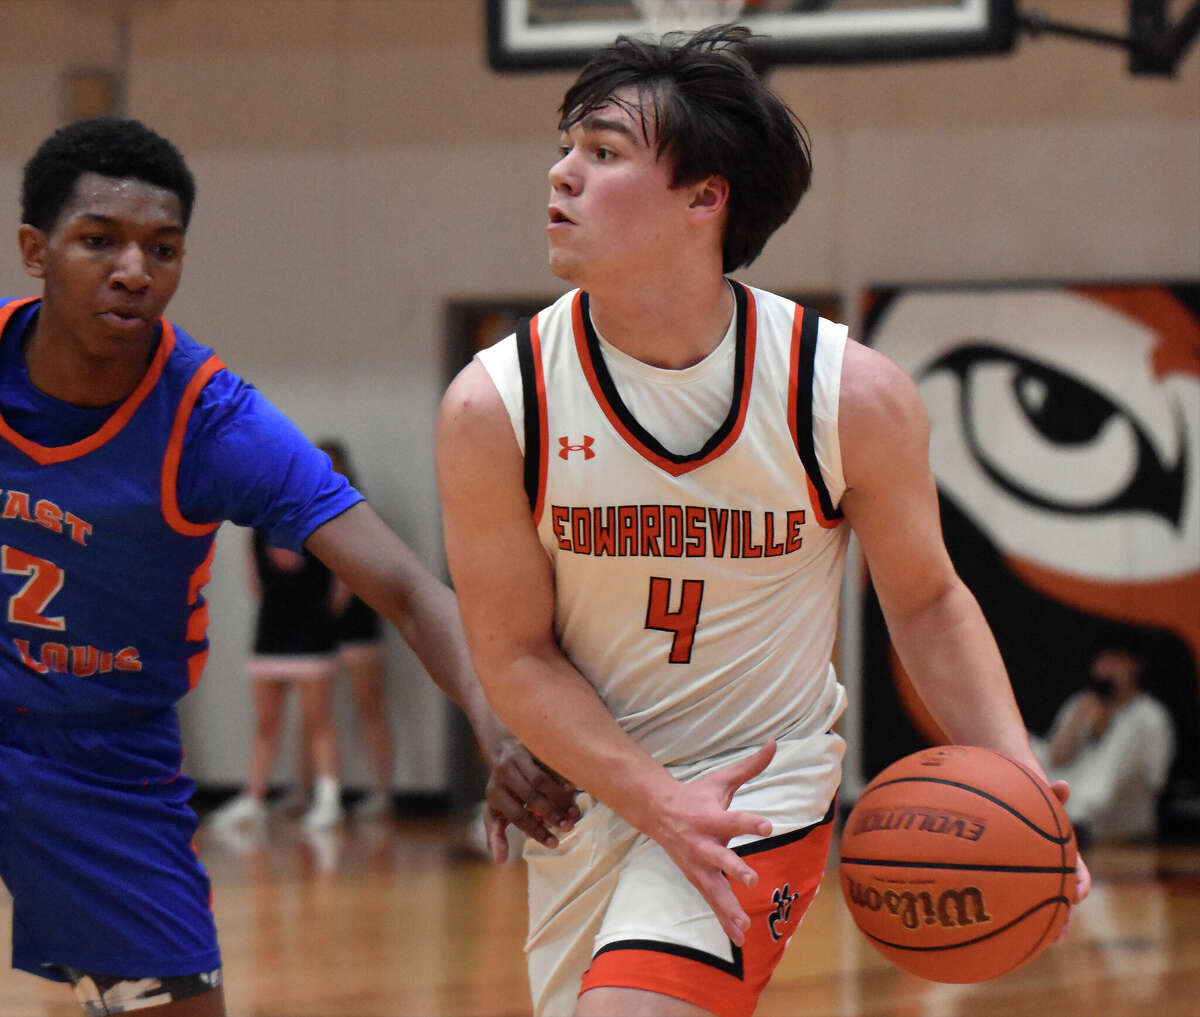 Edwardsville's Jake Curry dribbles up the court against East St. Louis on Tuesday in Southwestern Conference action at Lucco-Jackson Gymnasium in Edwardsville.